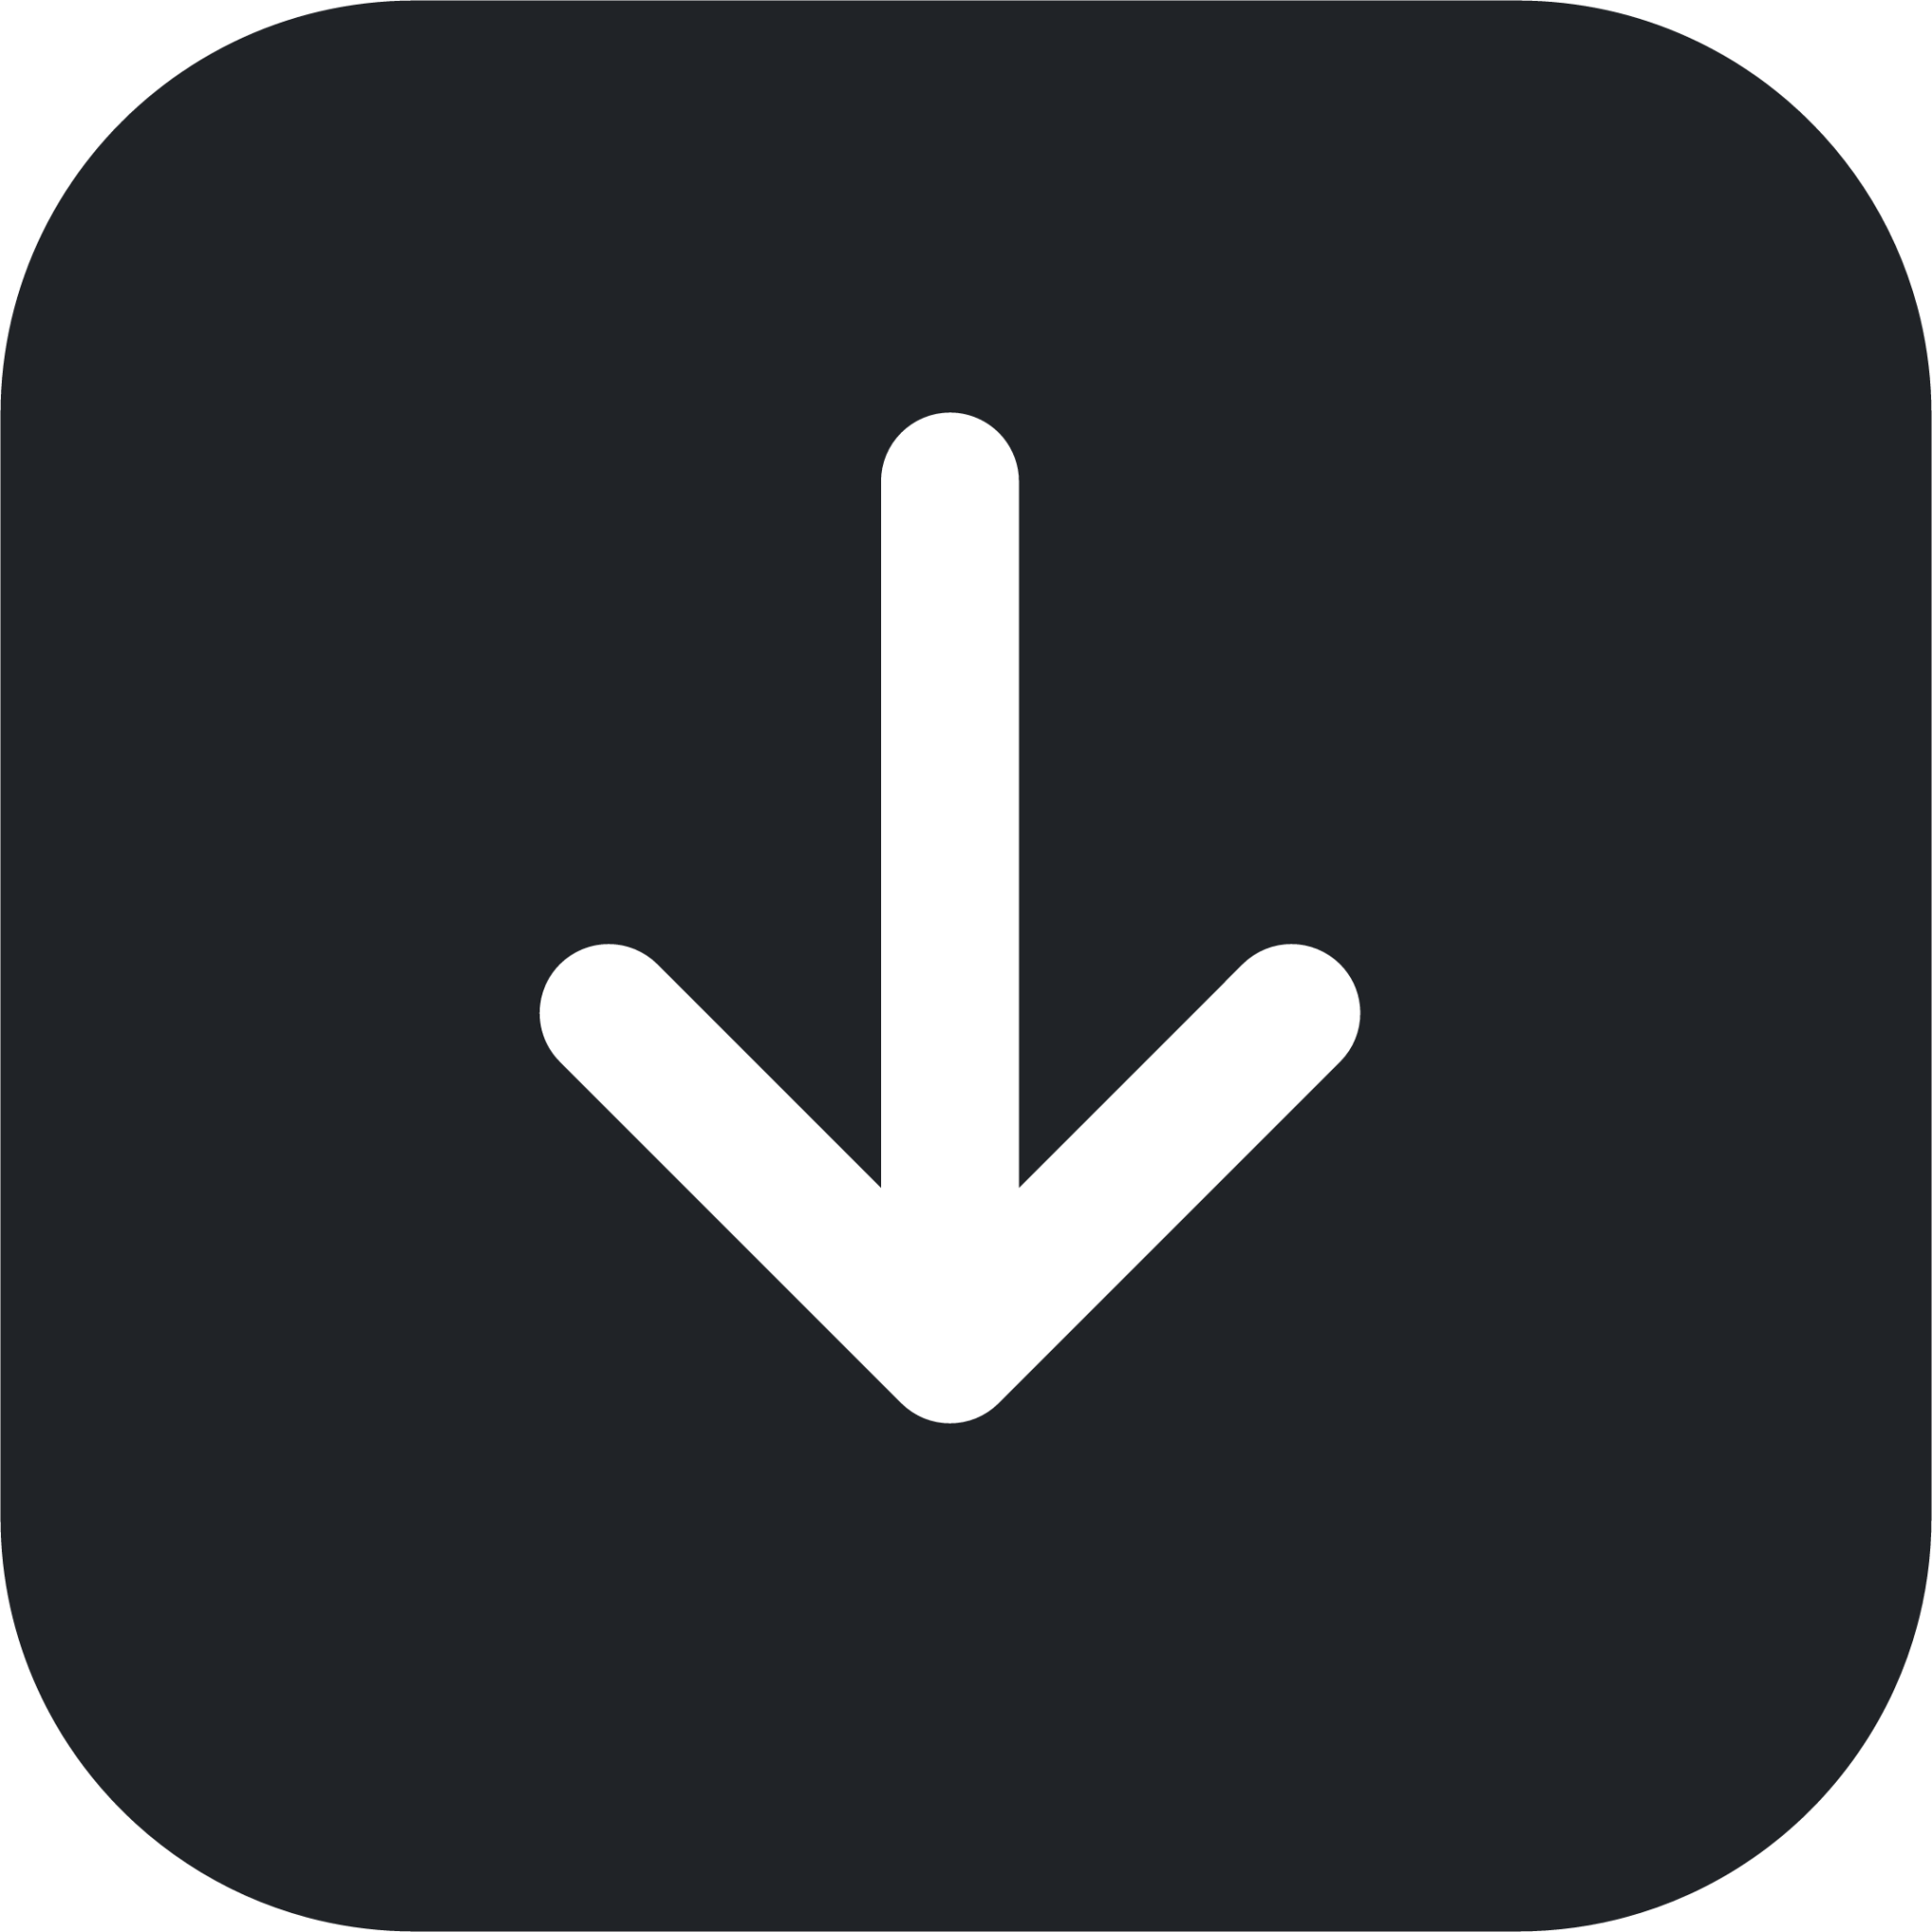 download (rounded filled) icon